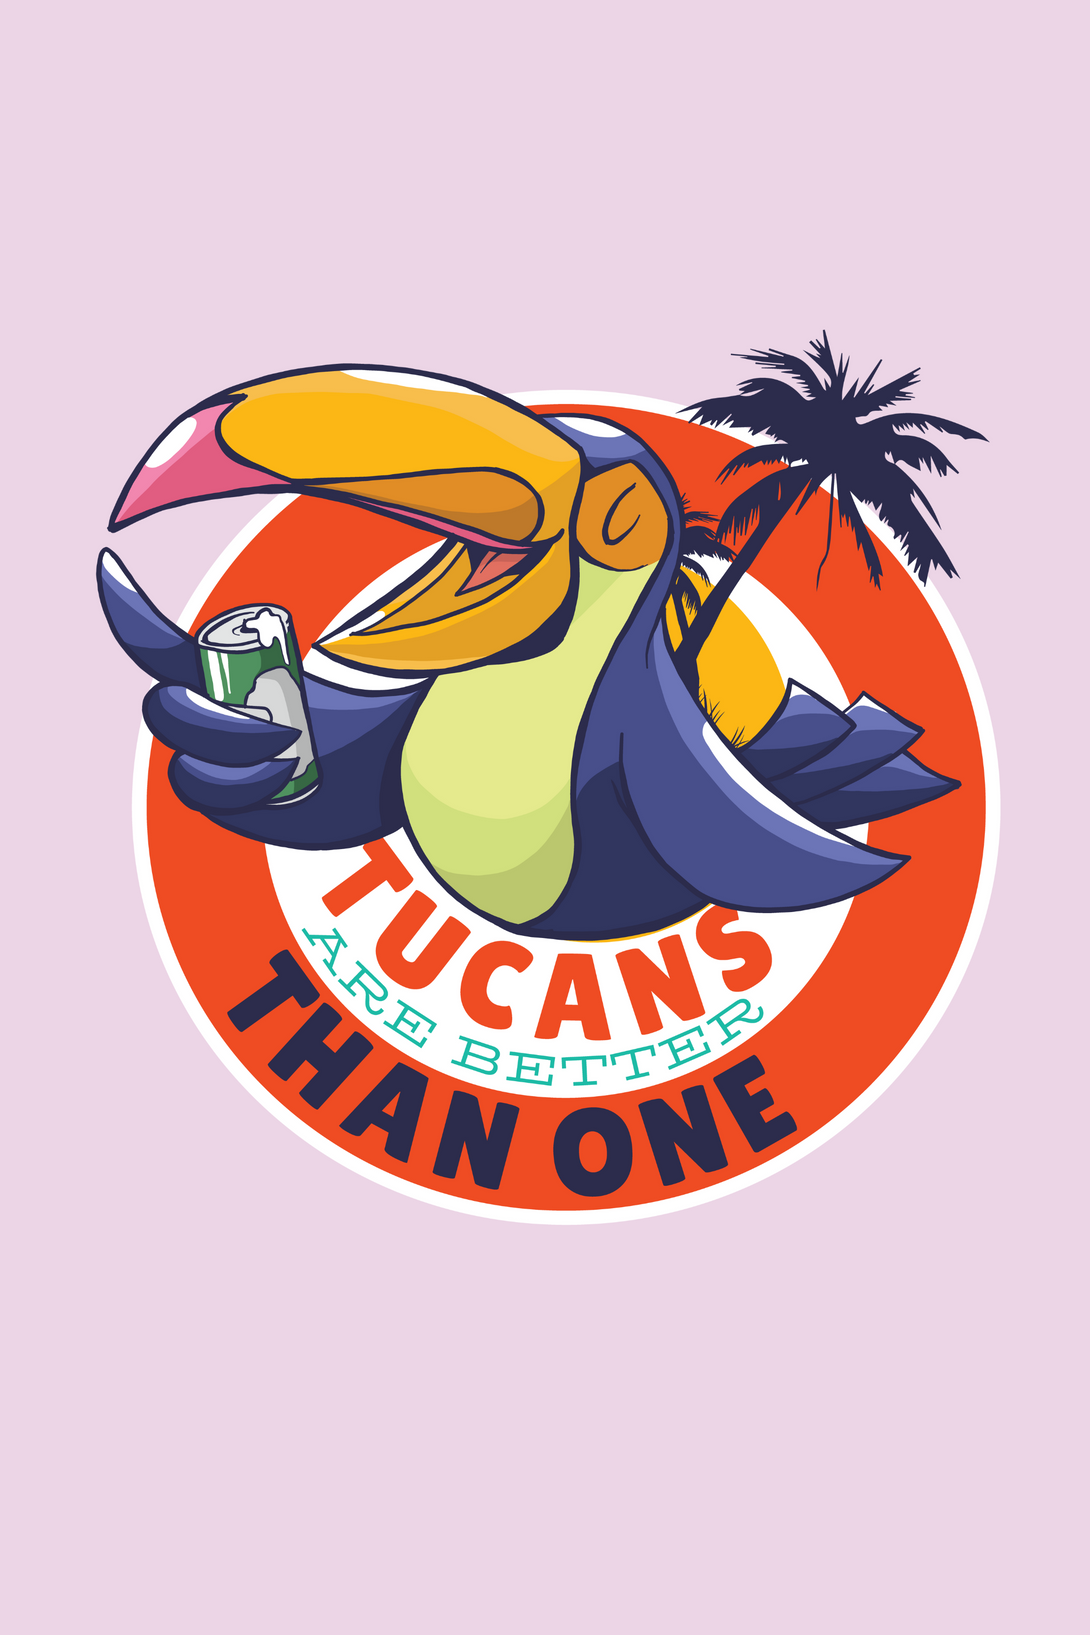 Tucans Are Better Tha One Printed T-Shirt For Women - WowWaves - 2